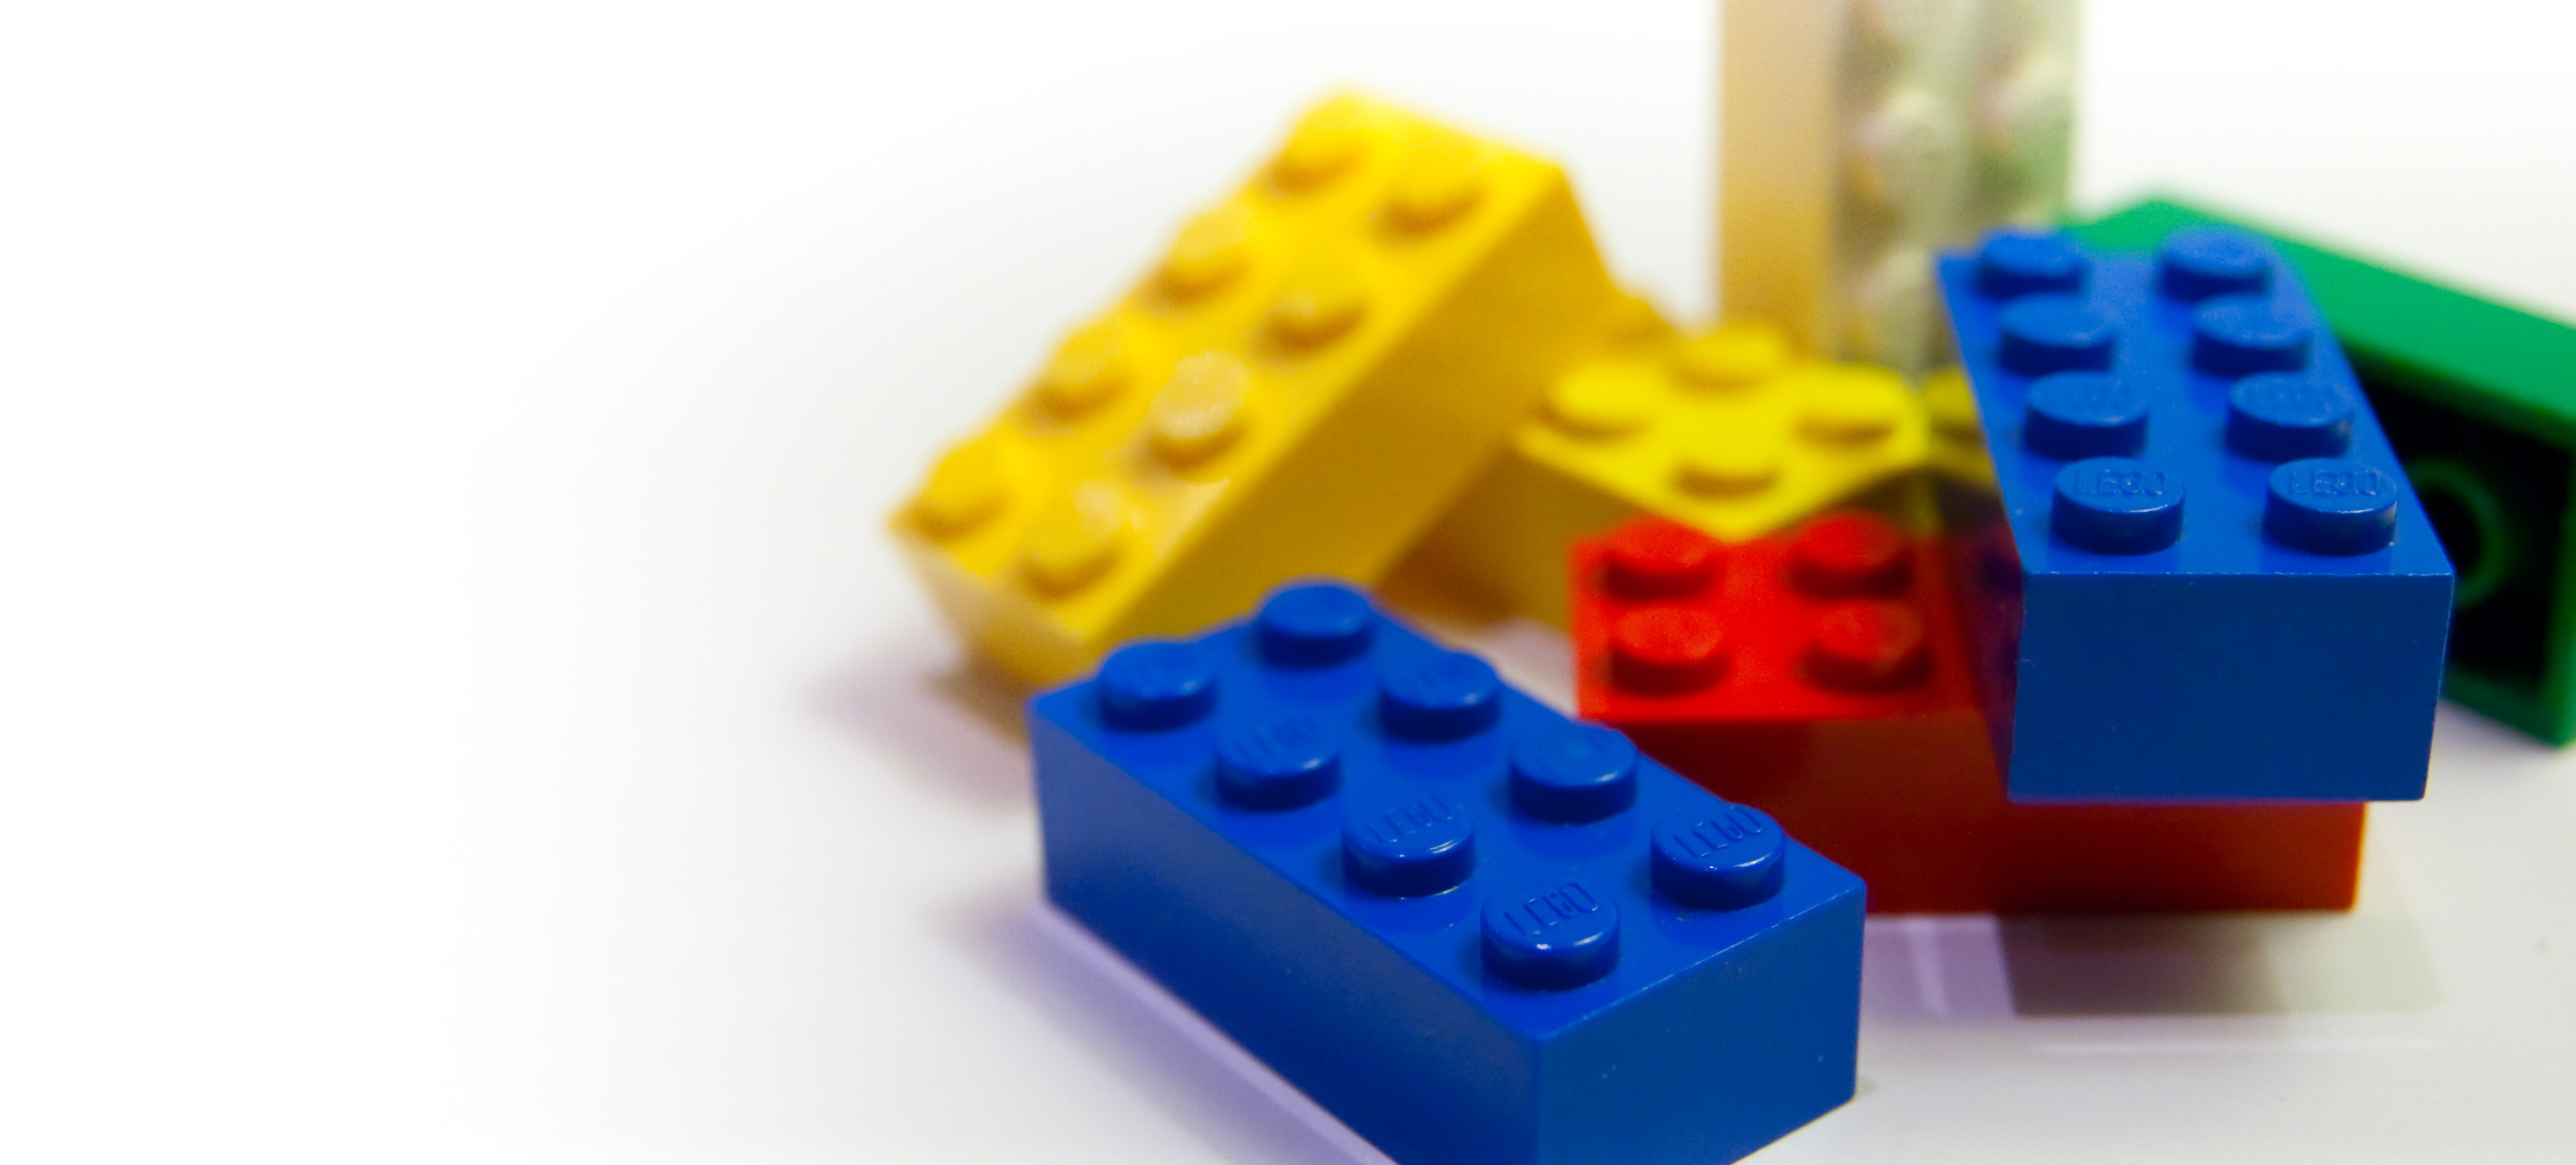 Free download Why Stepping On LEGO Hurts So Much Gizmodo Australia [3888x1759] for your Desktop, Mobile & Tablet. Explore Lego Blocks Wallpaper. LEGO Background Wallpaper, Ninjago Wallpaper, LEGO Ninjago Wallpaper